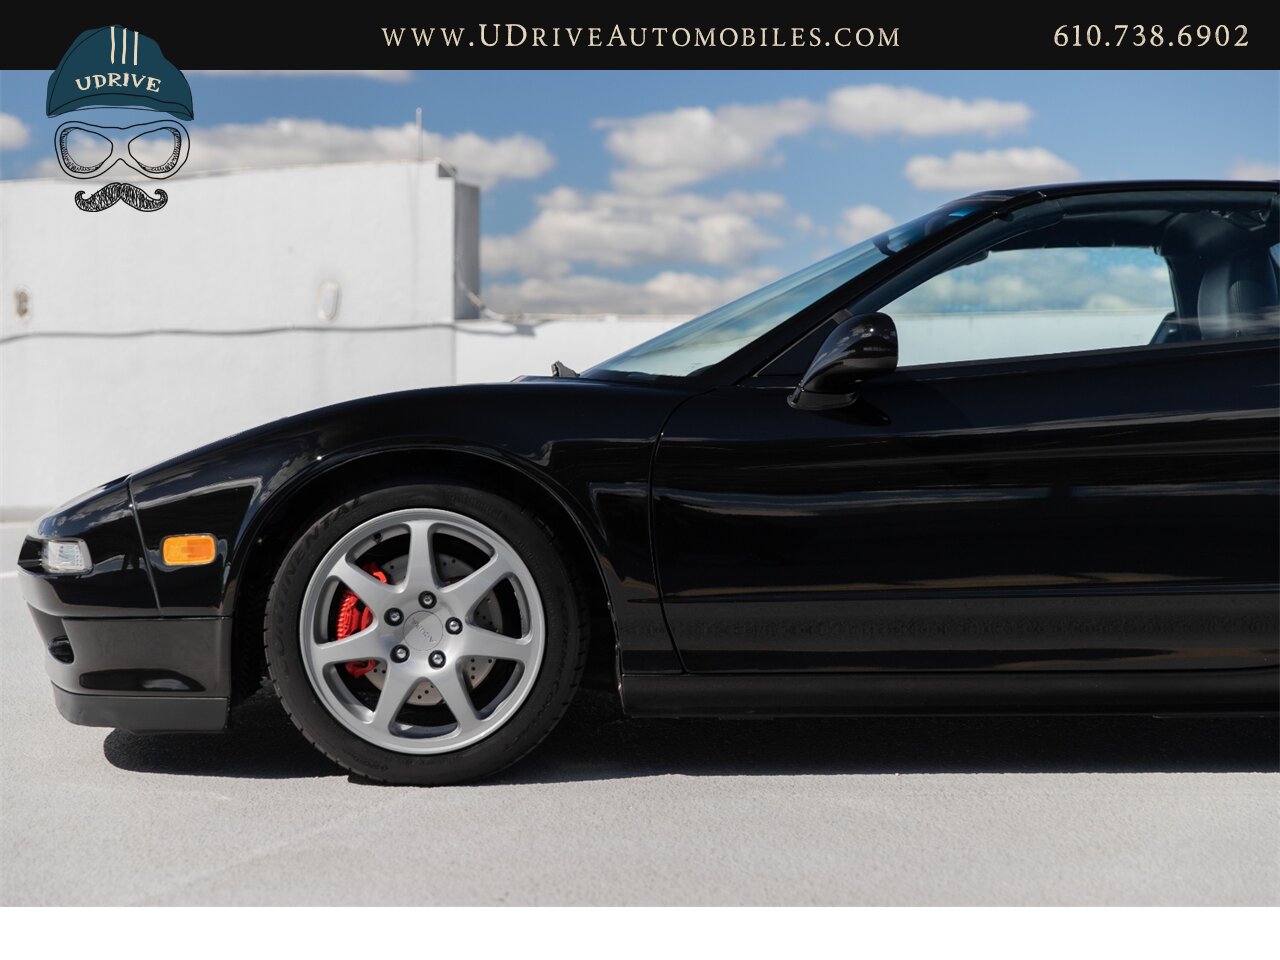 1996 Acura NSX NSX-T  5 Speed Manual Fresh Timing Belt Service - Photo 12 - West Chester, PA 19382